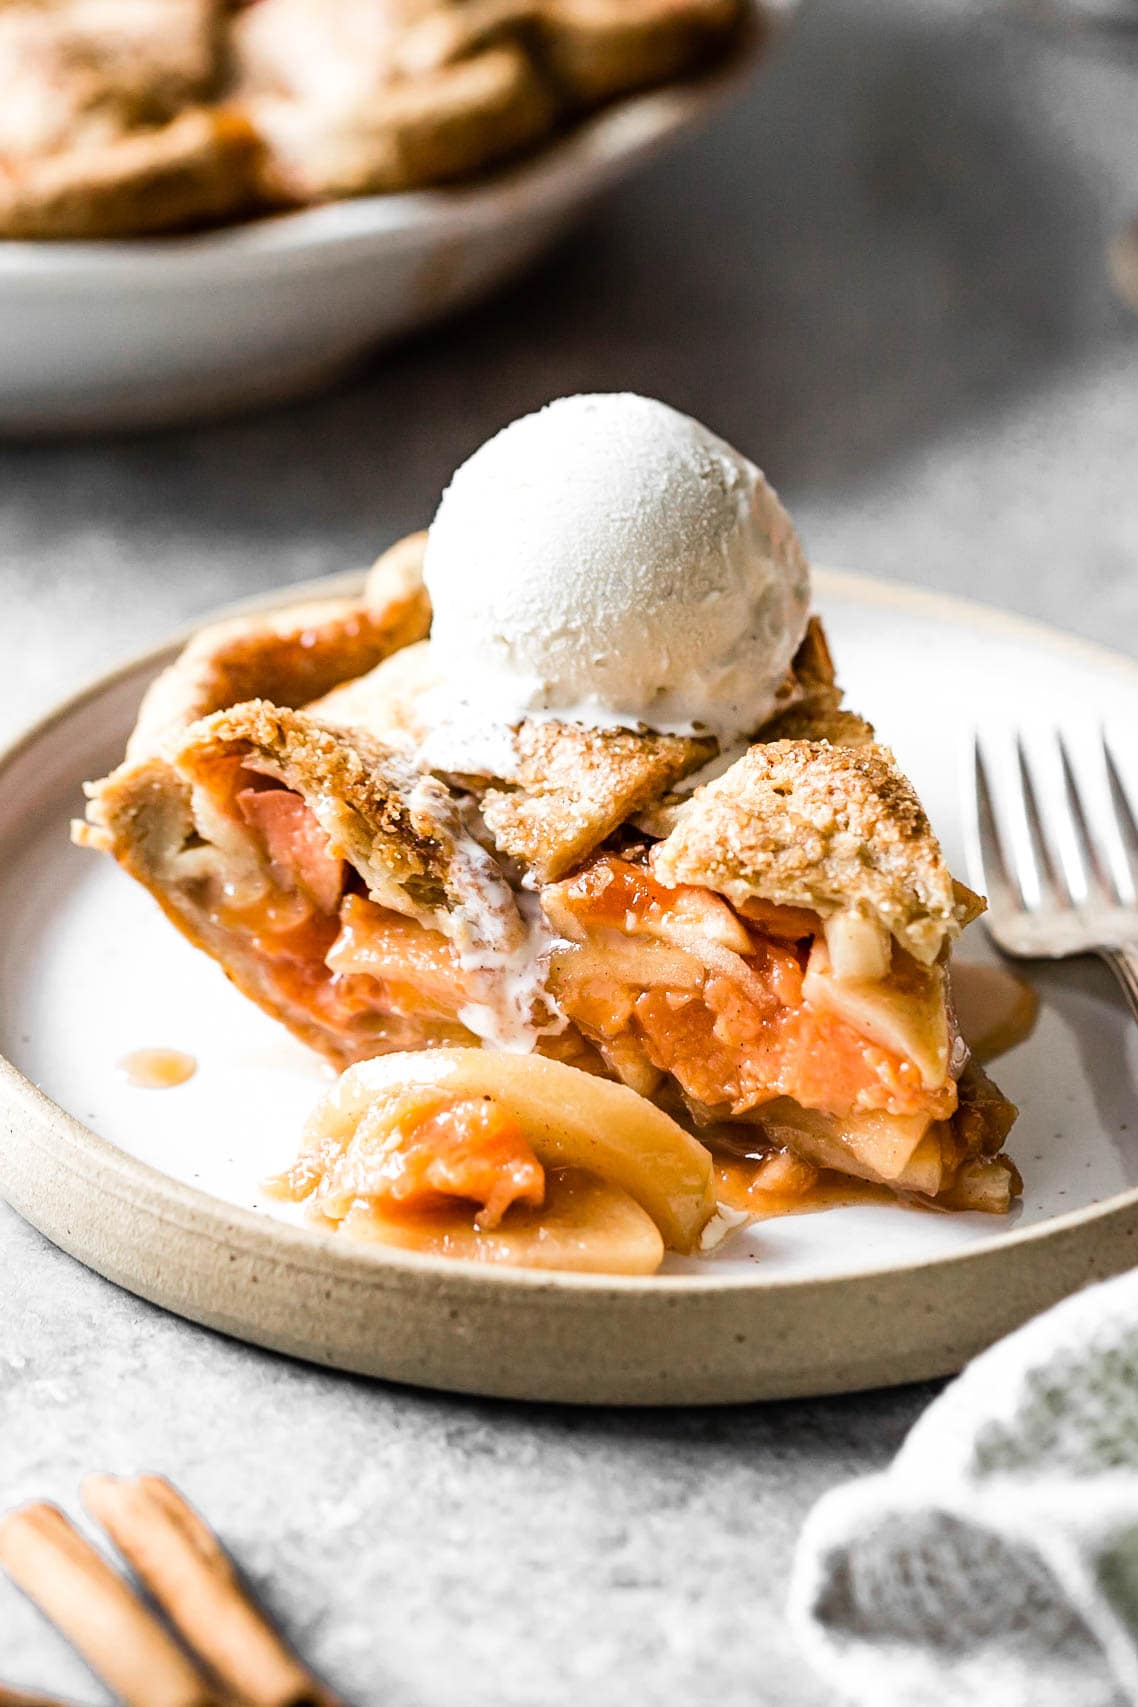 A tantalizing slice of pie stuffed with glossy fruit and a crispy crust is topped with a scoop of drippy ice cream